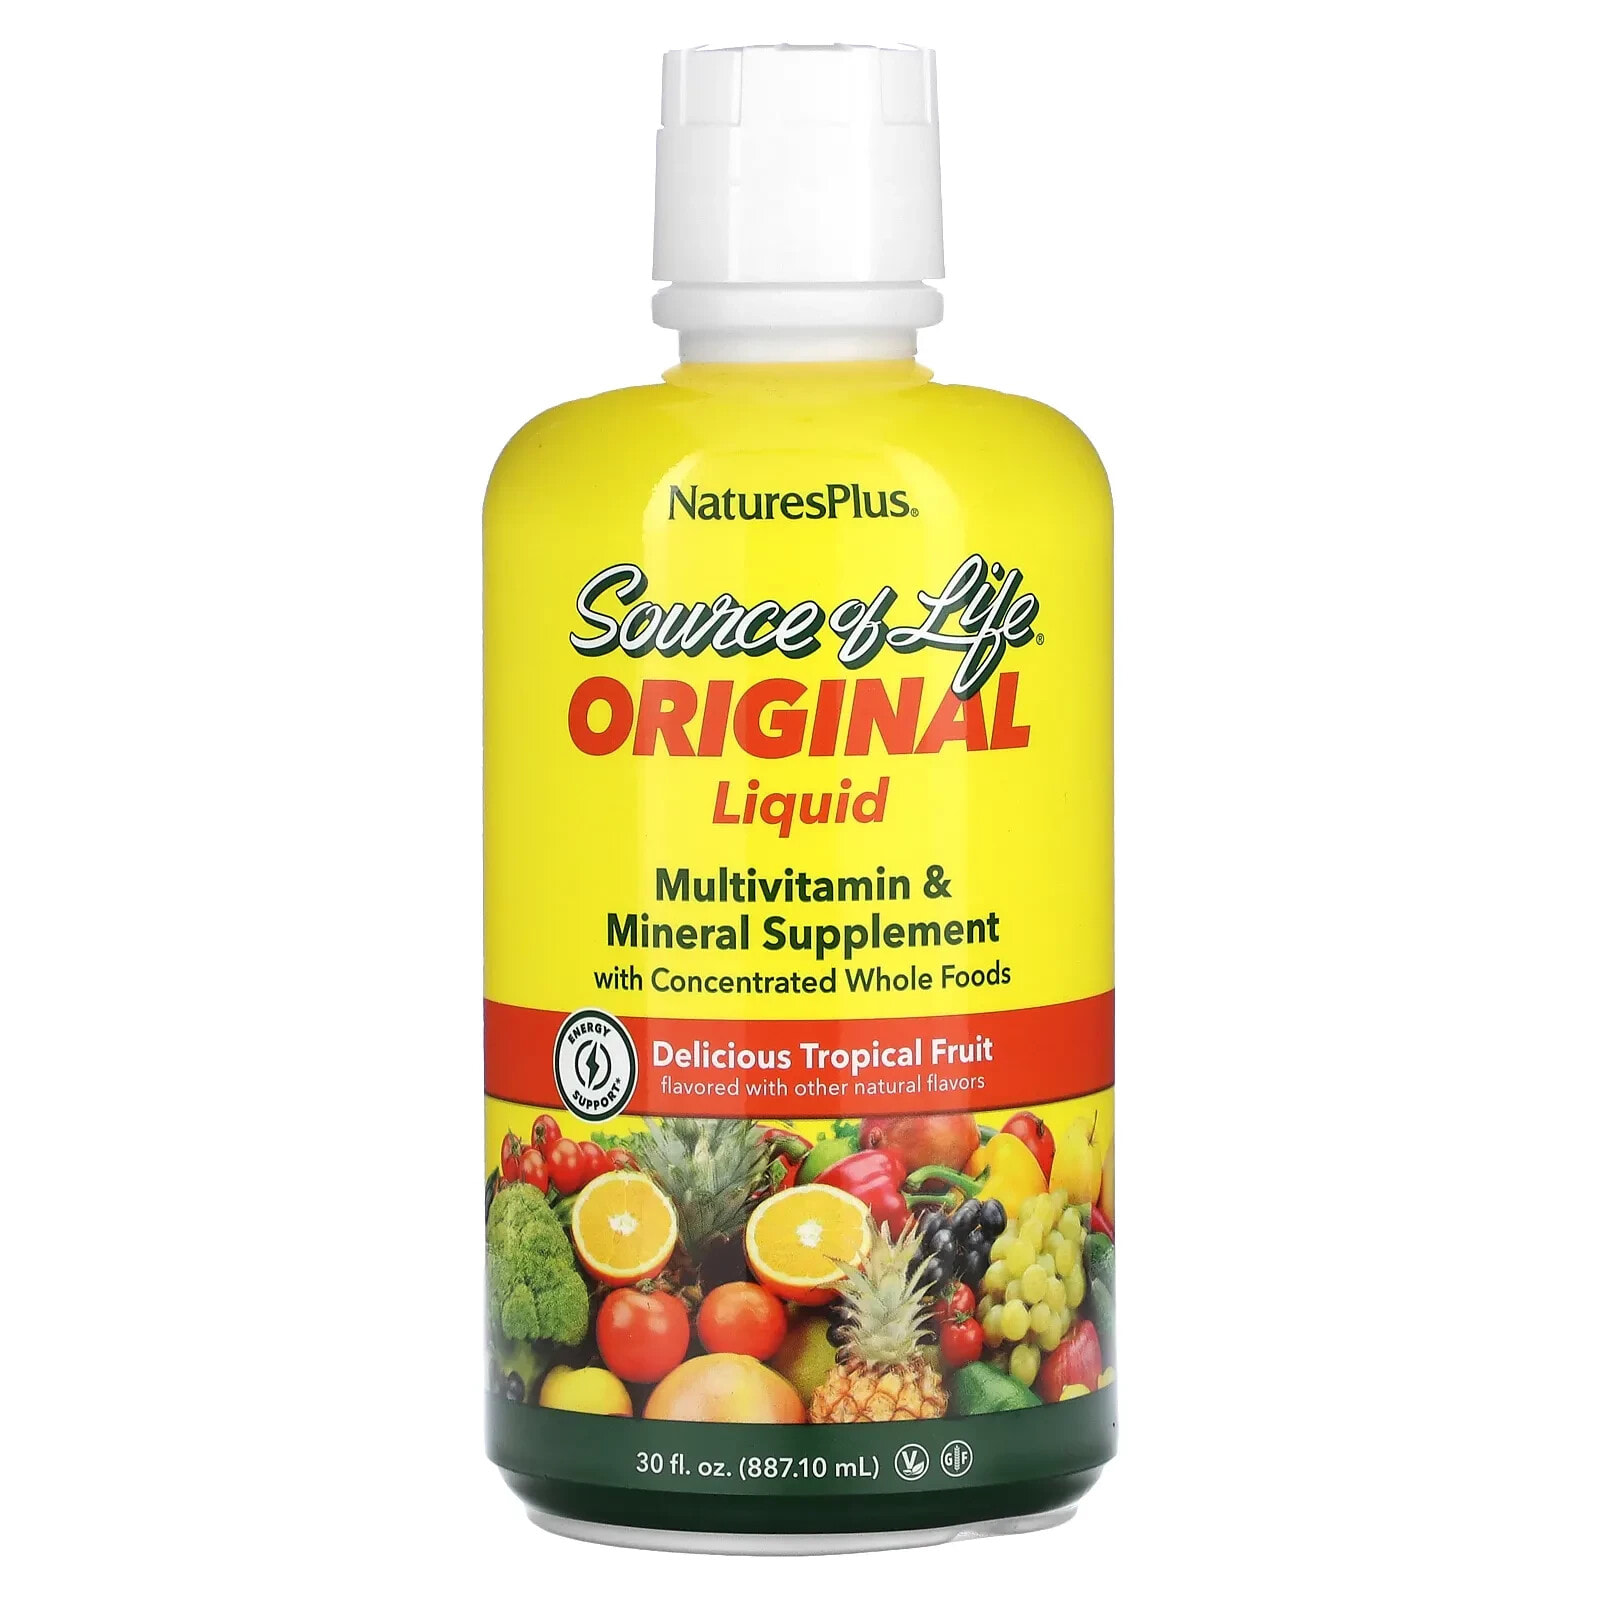 Source of Life, Liquid Multi-Vitamin & Mineral Supplement with Concentrated Whole Foods, Tropical Fruit, 30 fl oz (887.10 ml)